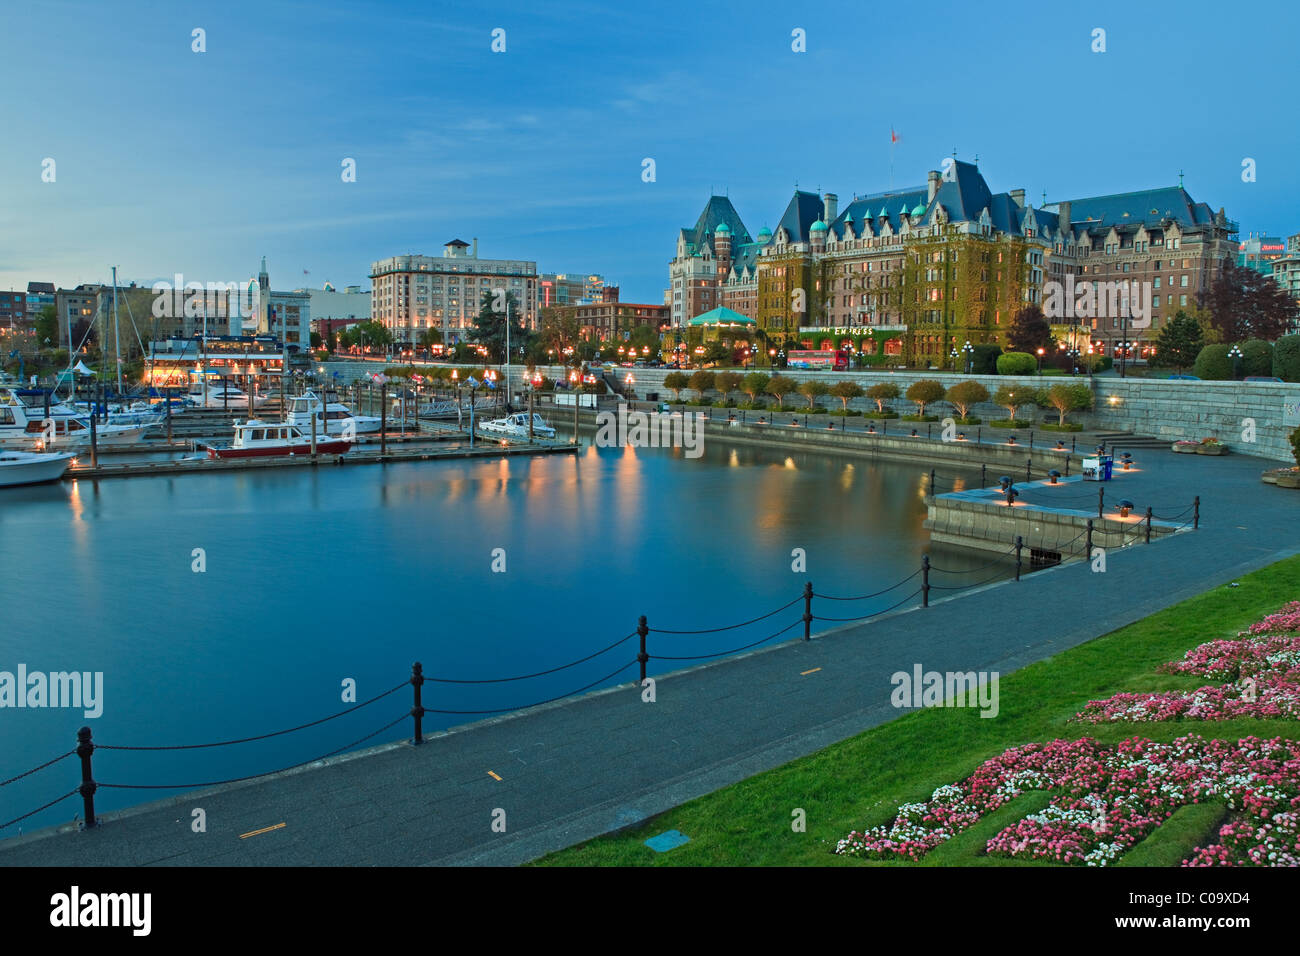 Victoria's Inner Harbour with the landmark Empress Hotel (Fairmont Hotel) in the background at twilight, Victoria, Vancouver Isl Stock Photo